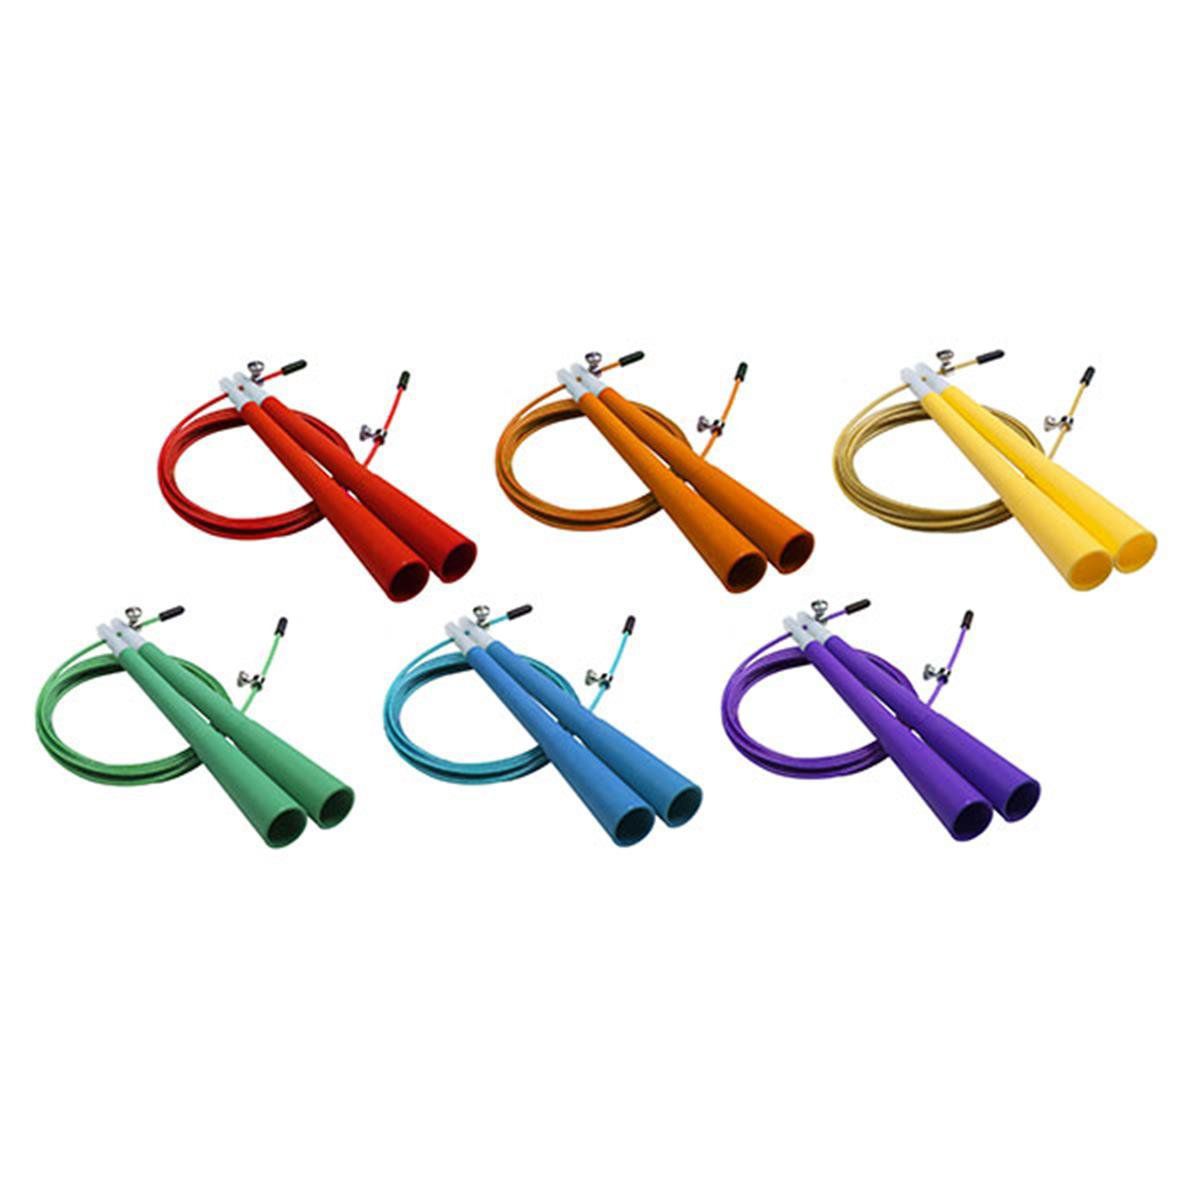 Image for HappyHealth Happyhealth Double Bearing Speed Jump Rope Multicolor - Set of 6 at Kohl's.